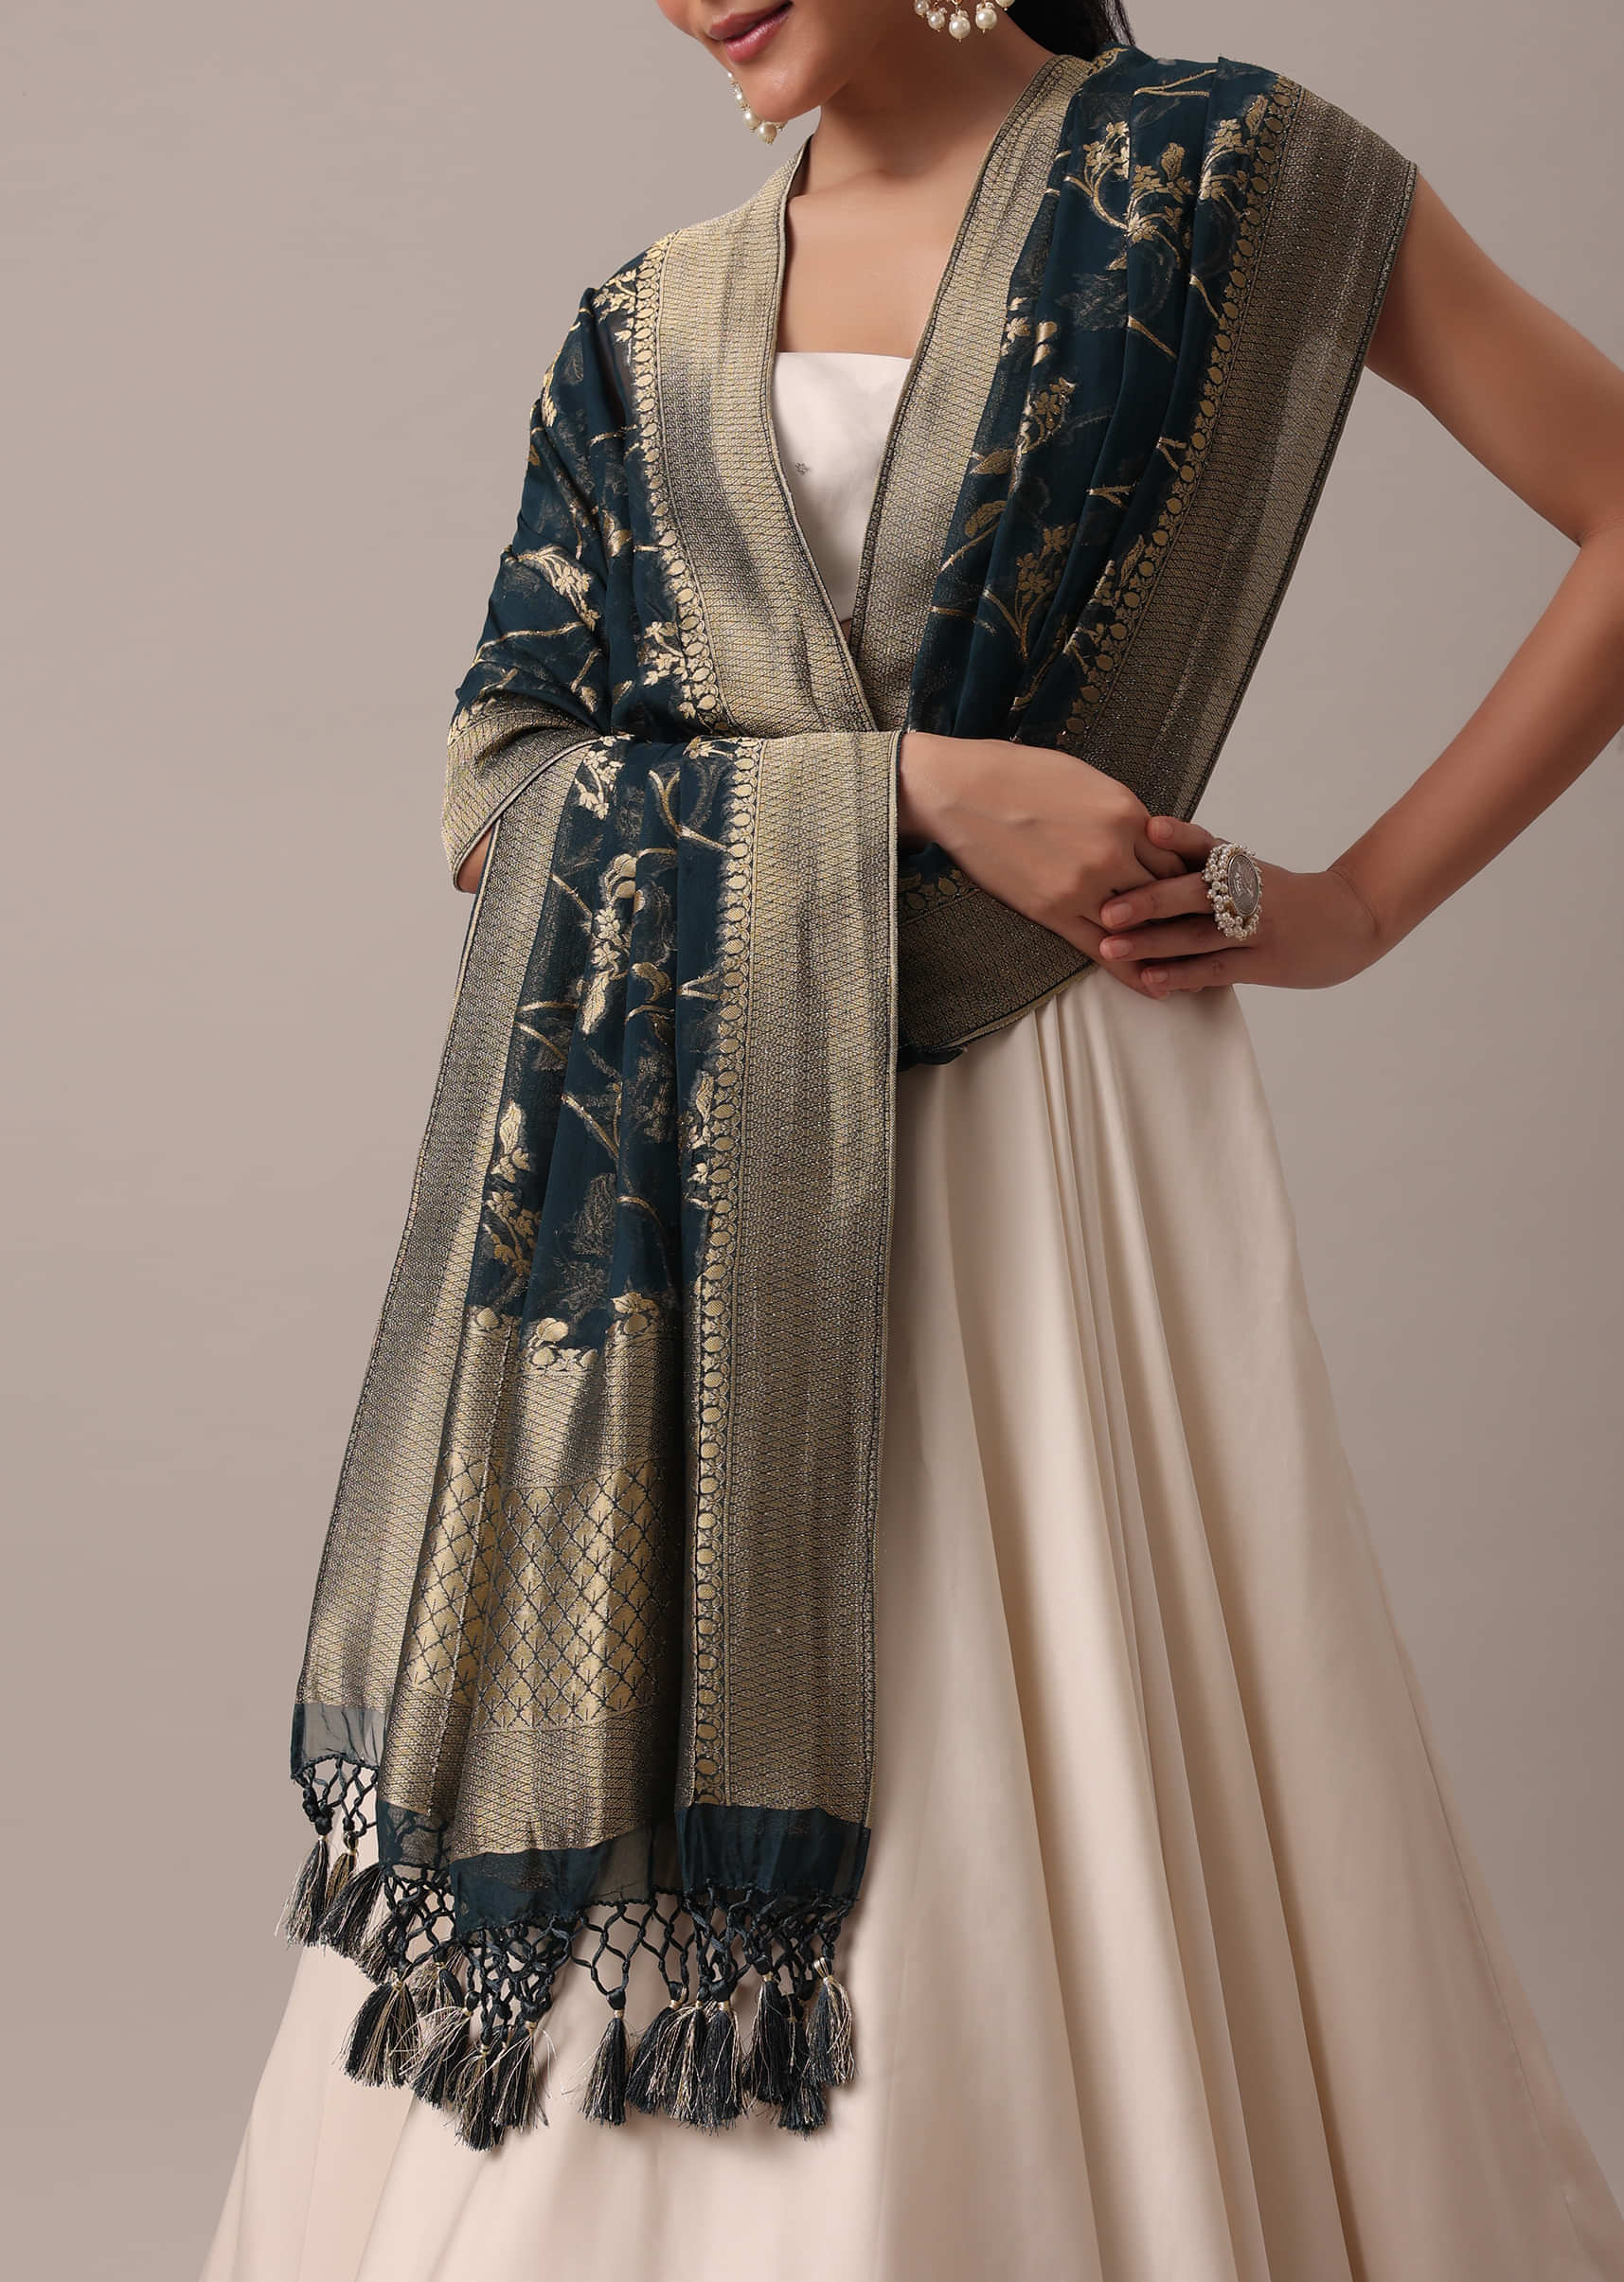 Ash Grey Shapewear Saree Petticoat In Cotton Lycra With Elastic Waistband  And Slit